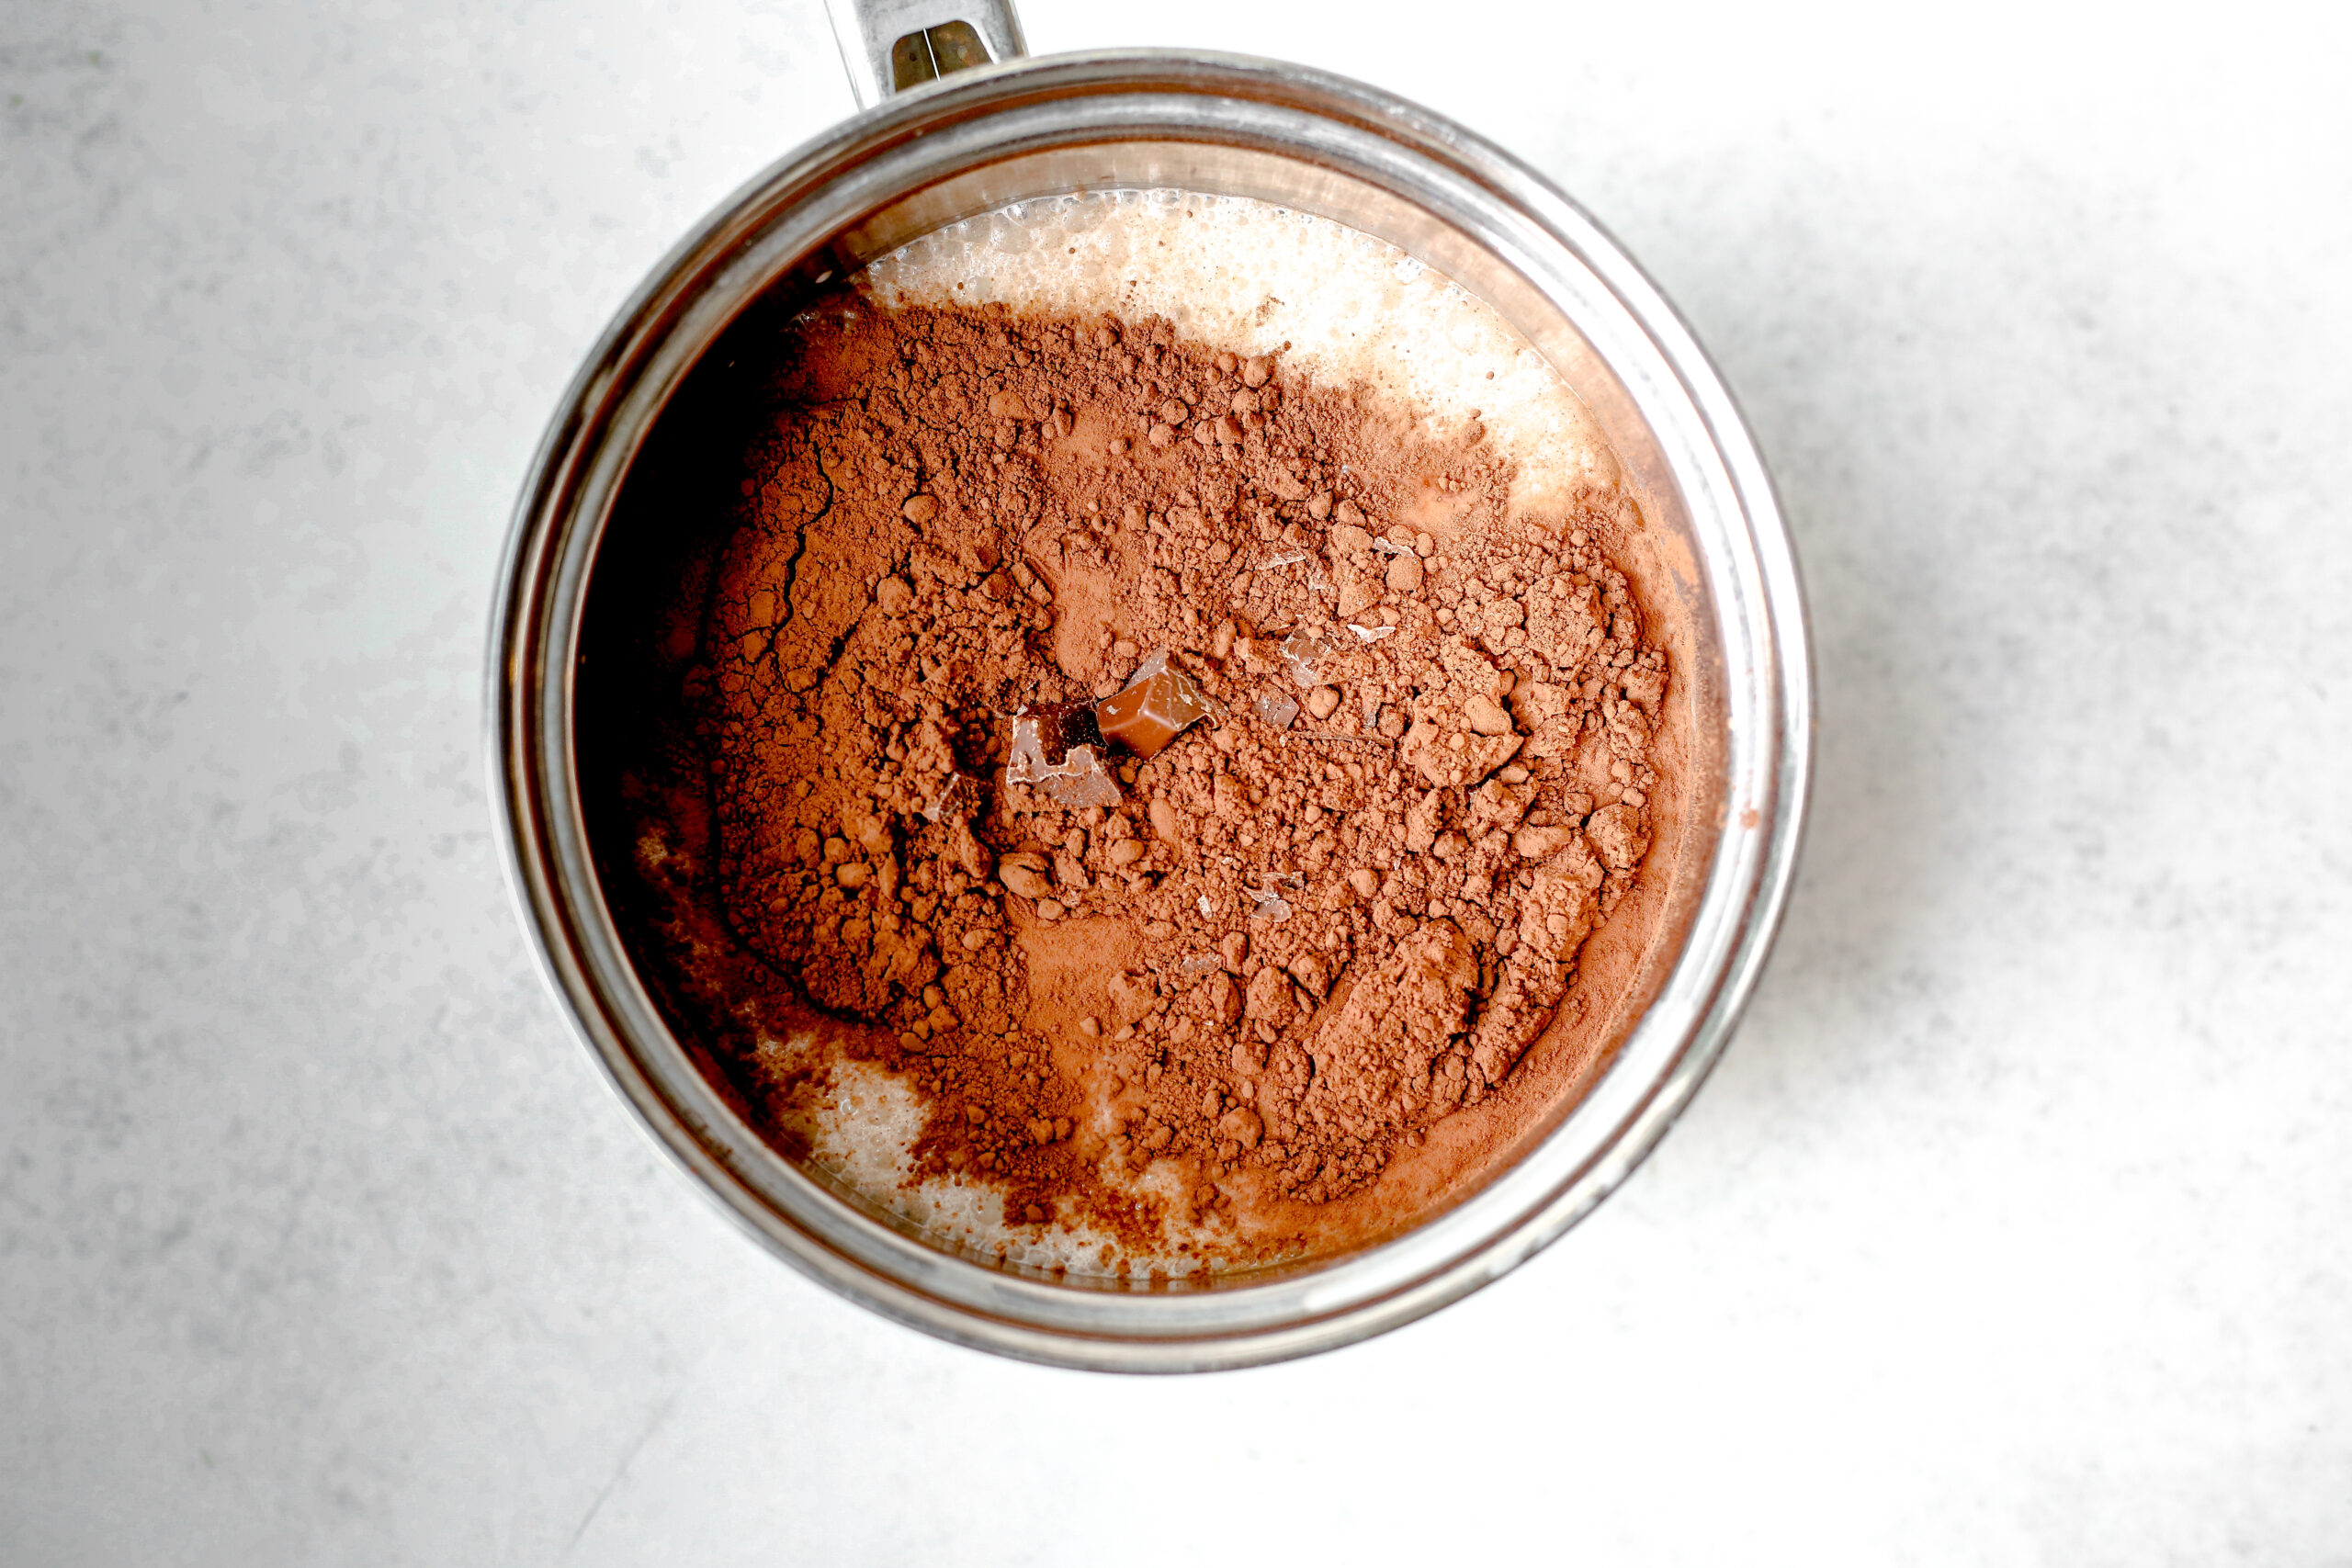 This is an overhead horizontal image of a silver saucepan with milk, cocoa powder and a few visible pieces of chopped chocolate in the center. The pot sits on a light grey surface.